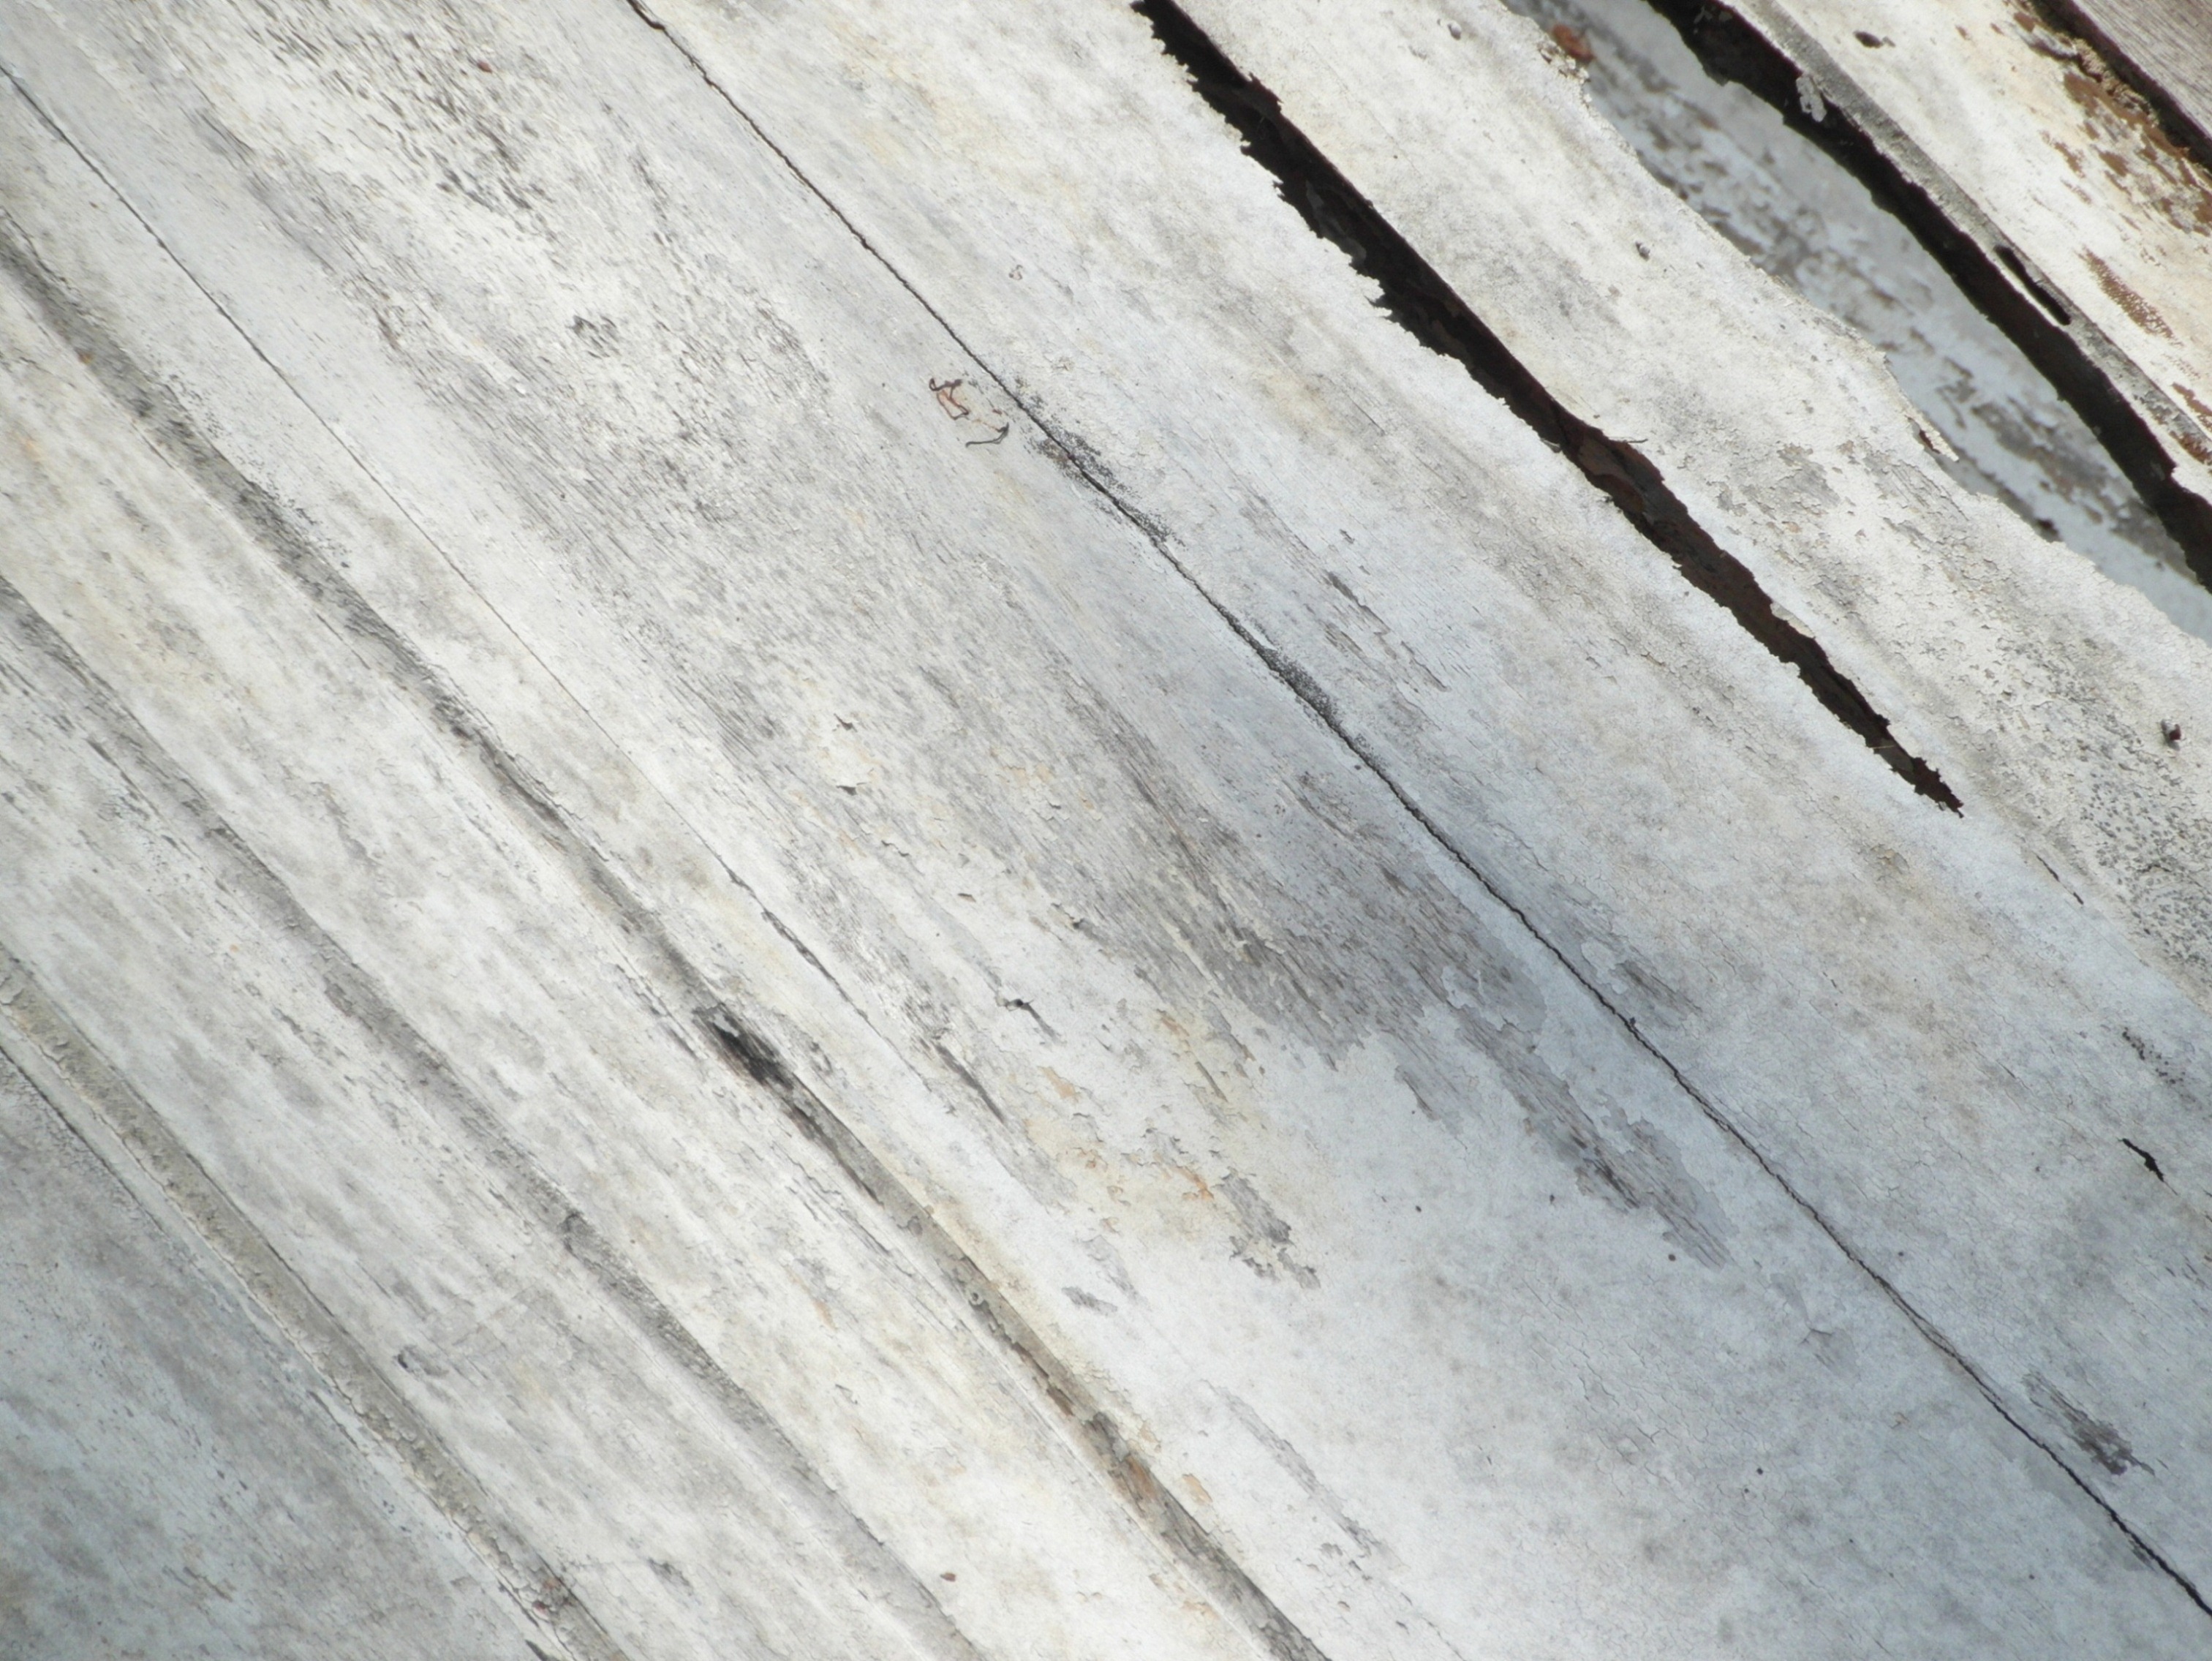 White Painted Wood Texture, Worn, Surface, Wooden, Wood, HQ Photo